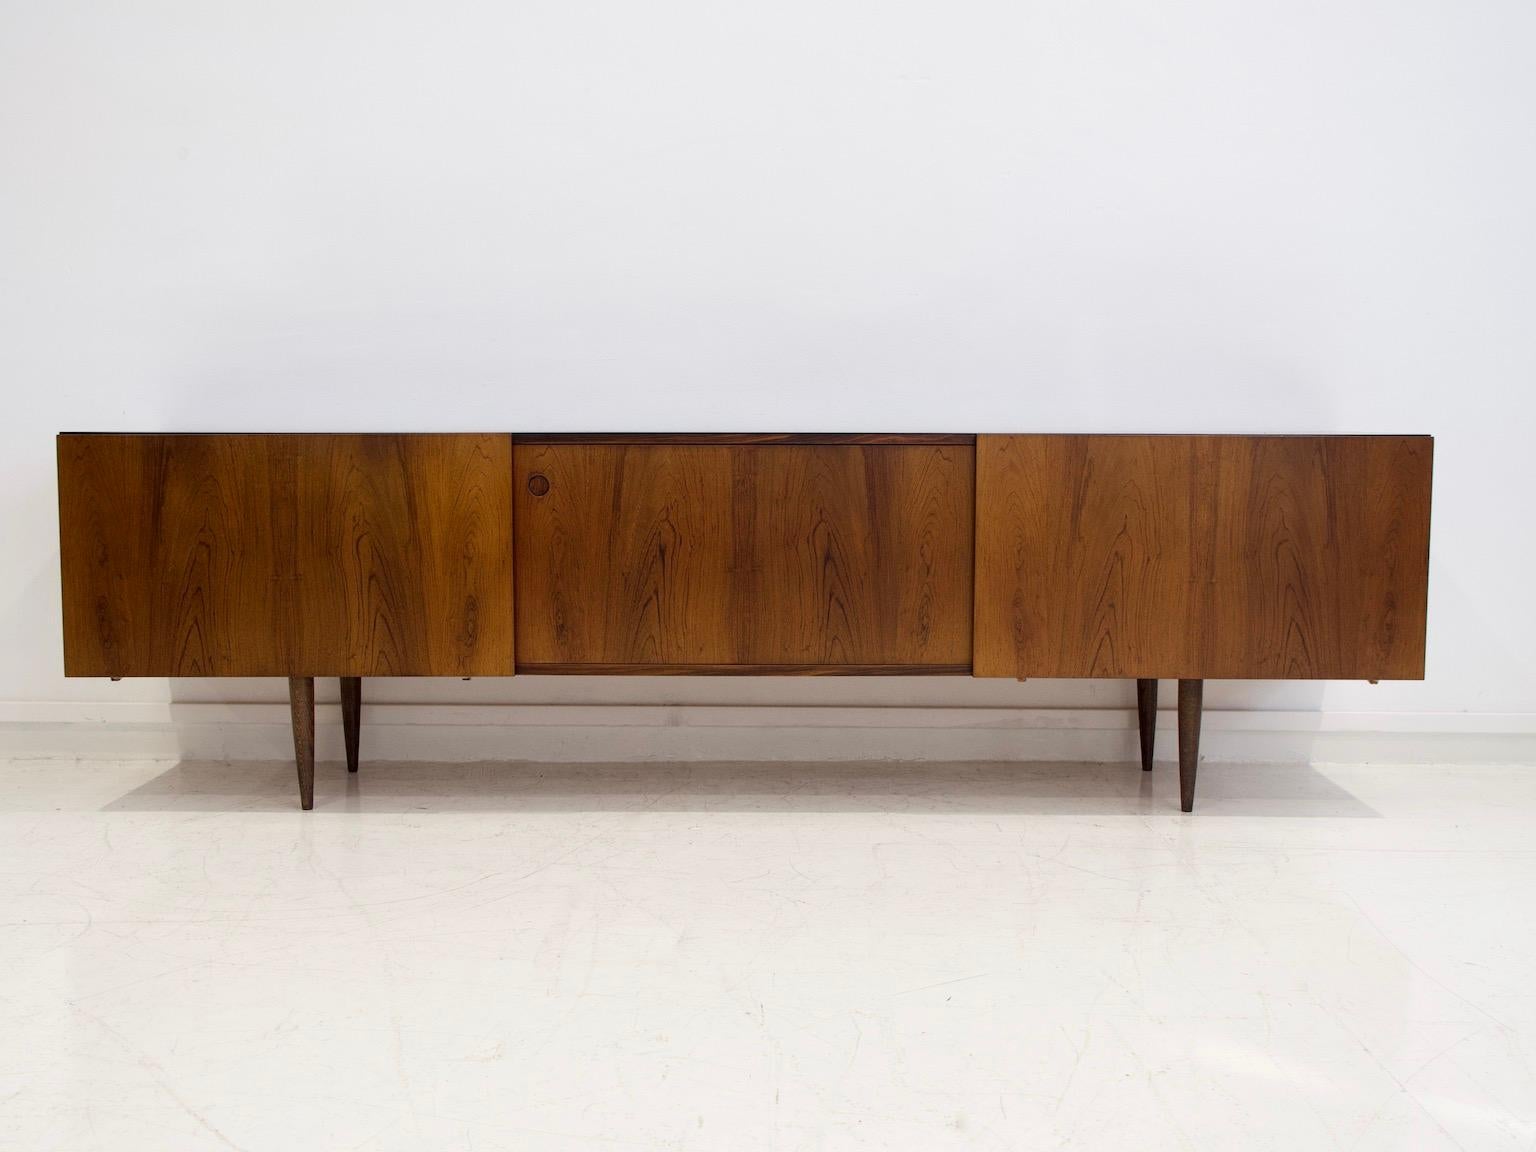 Low sideboard designed by Ib Kofod-Larsen and manufactured at Faarup Møbelfabrik in the 1960s. Veneered with hardwood, front with sliding doors, behind which are shelves and felt-covered trays. Later mounted tapered legs.